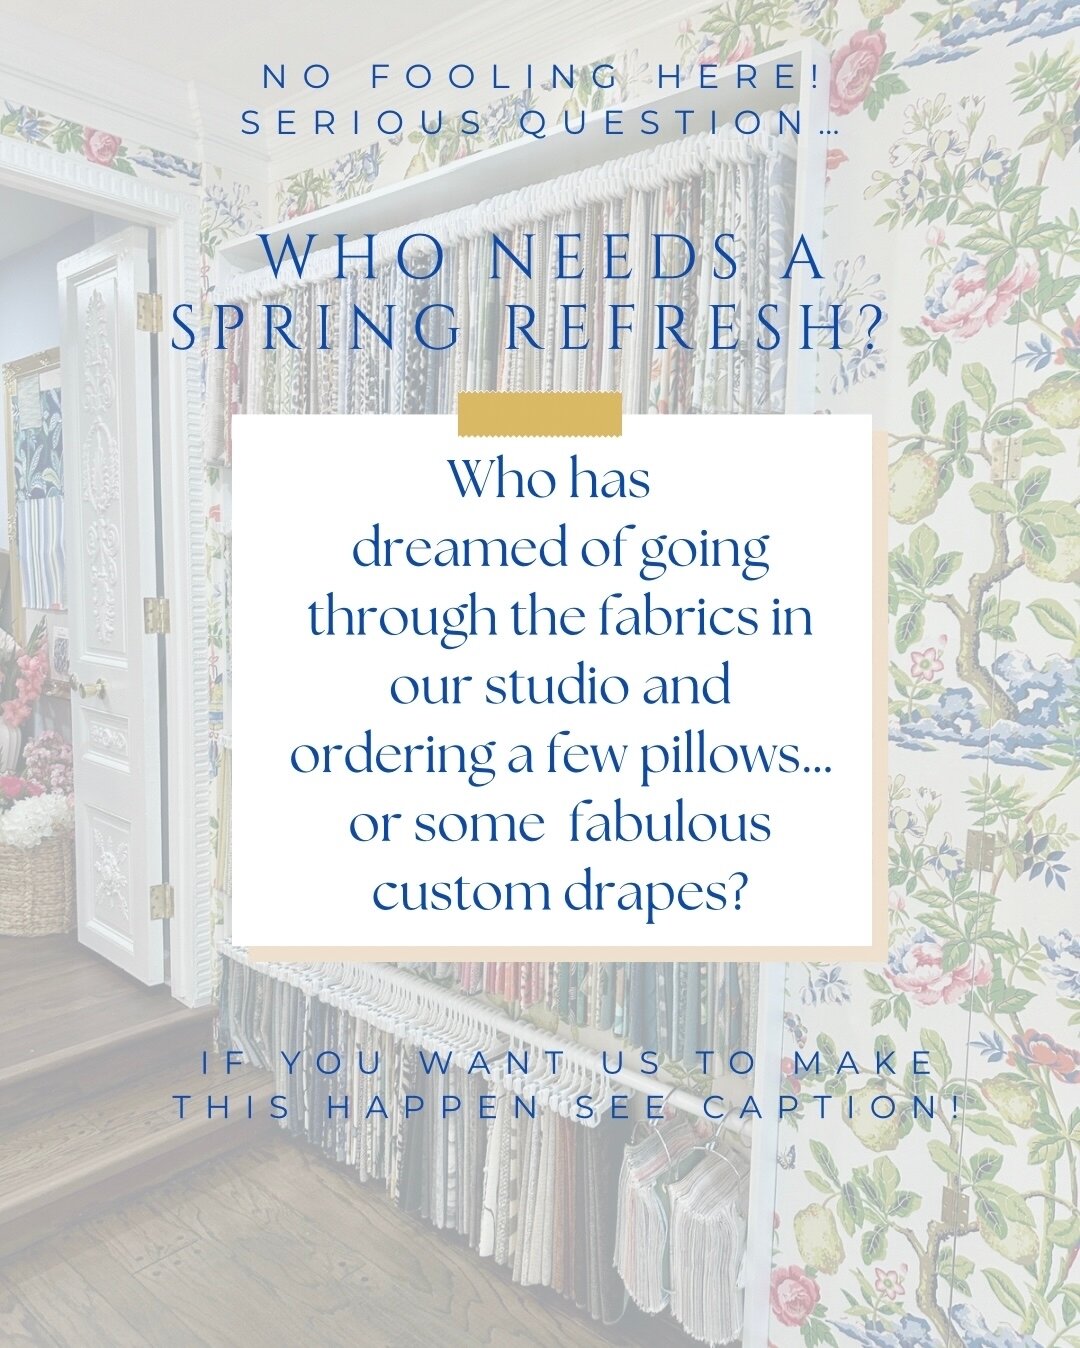 Our studio is ready for a Spring Refresh! Throughout the month of April, we will be offering various opportunities to help you with your own Spring Refresh! ☀️🌱✨
 
We are asked all the time if we could &ldquo;just order&hellip;&rdquo; - but we only 